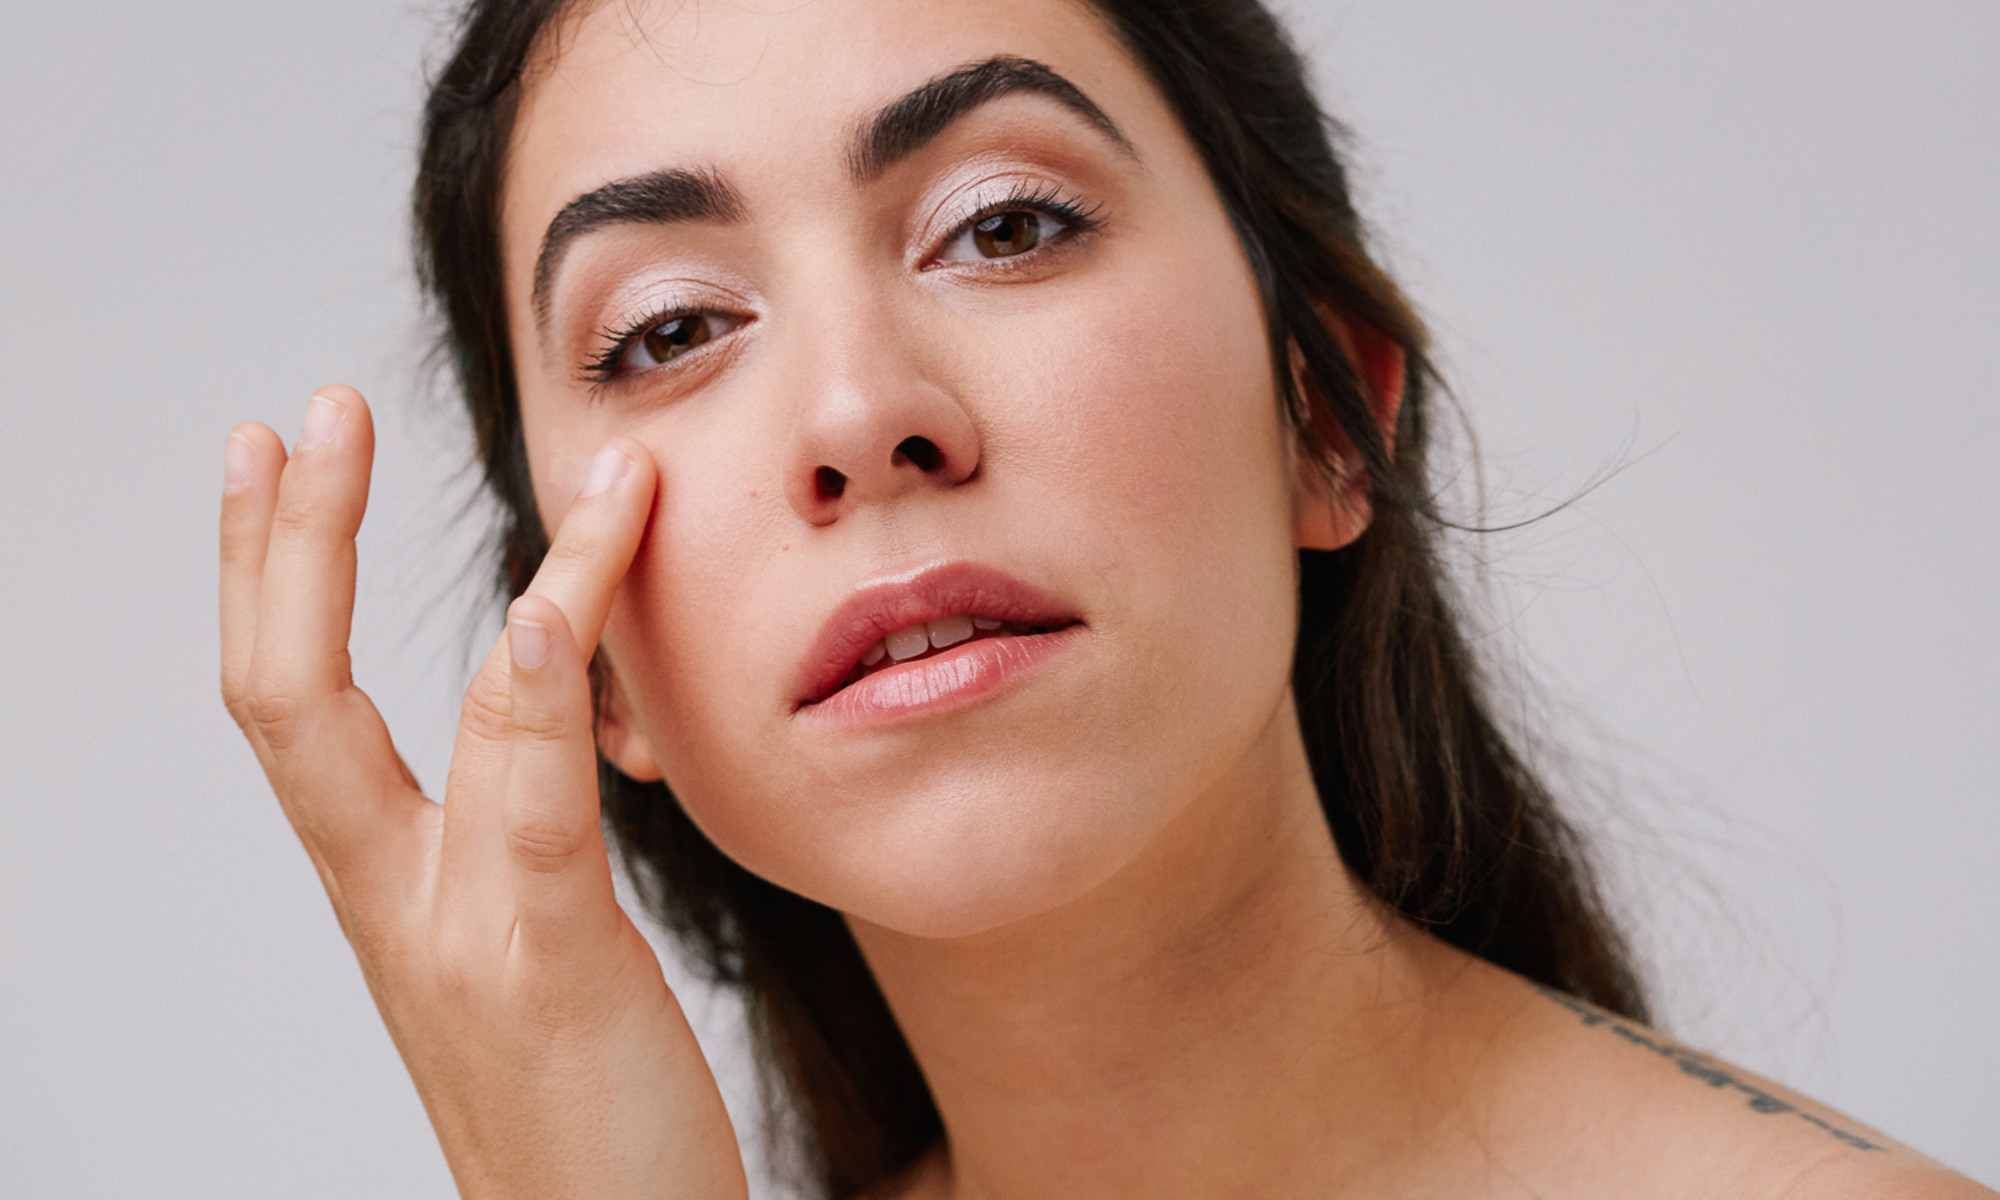 This Concealer & Eyeshadow Trick Can Make Your Eyes Appear Bigger